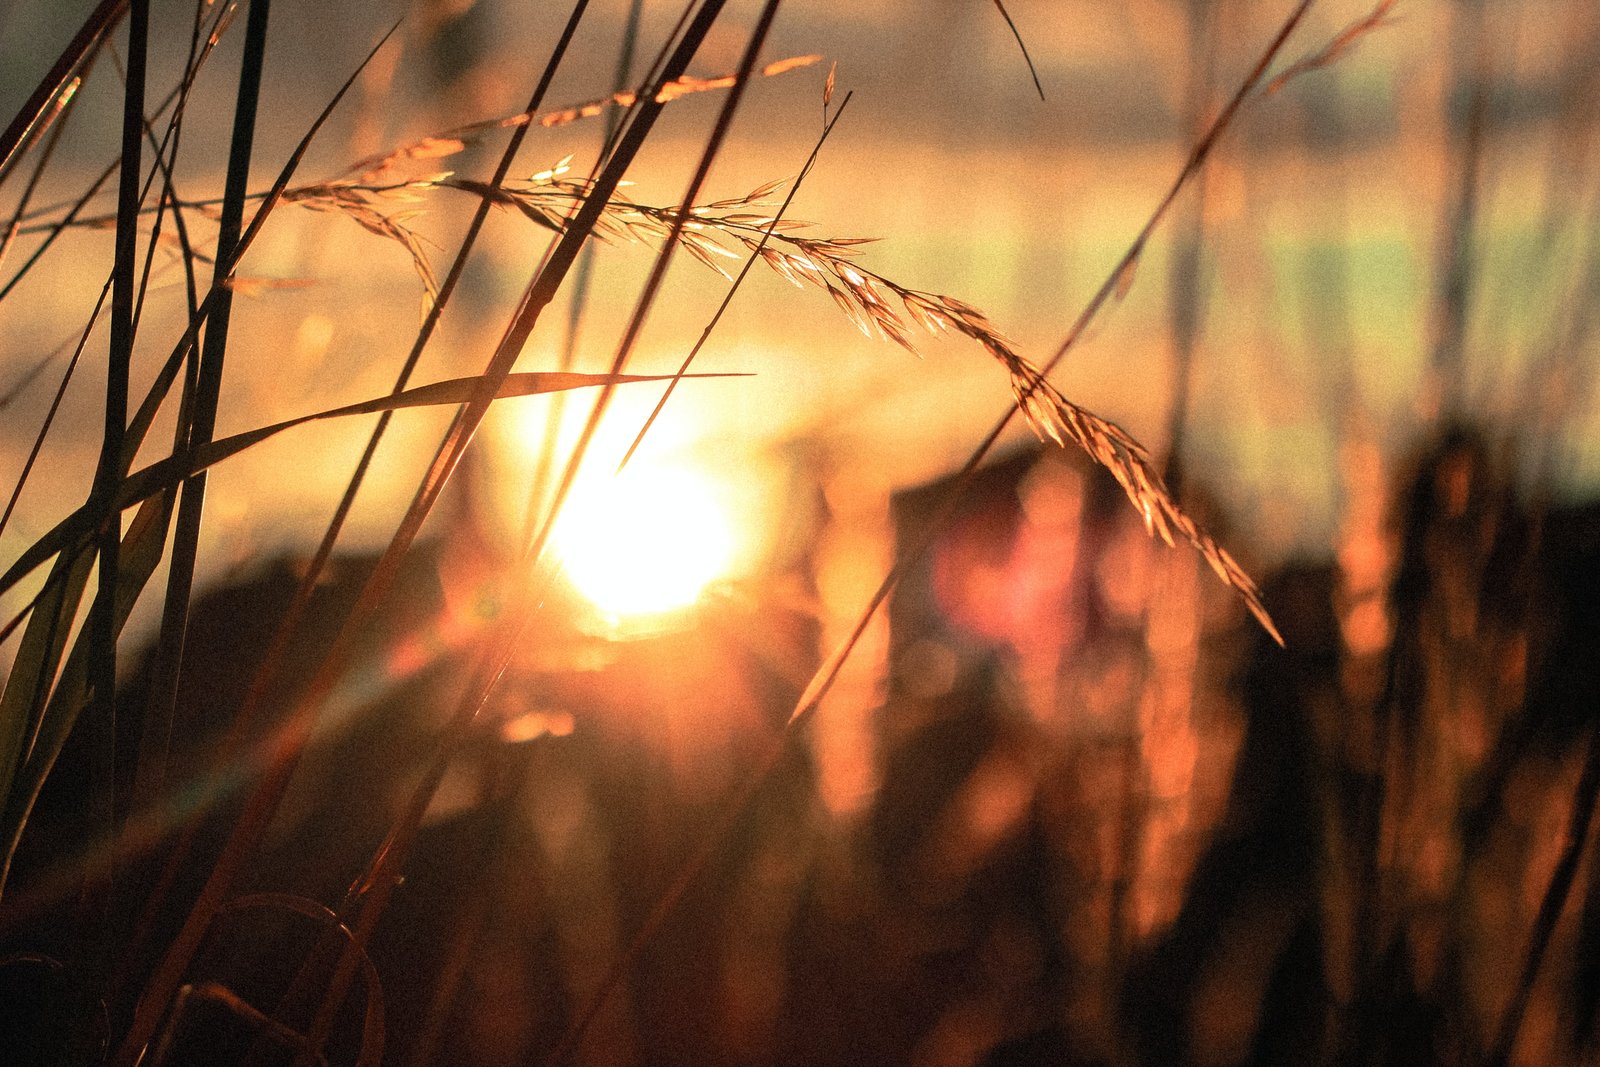 Wheat, Weeds, and the End of the Age: What the Parable of the Tares Says About the World Today